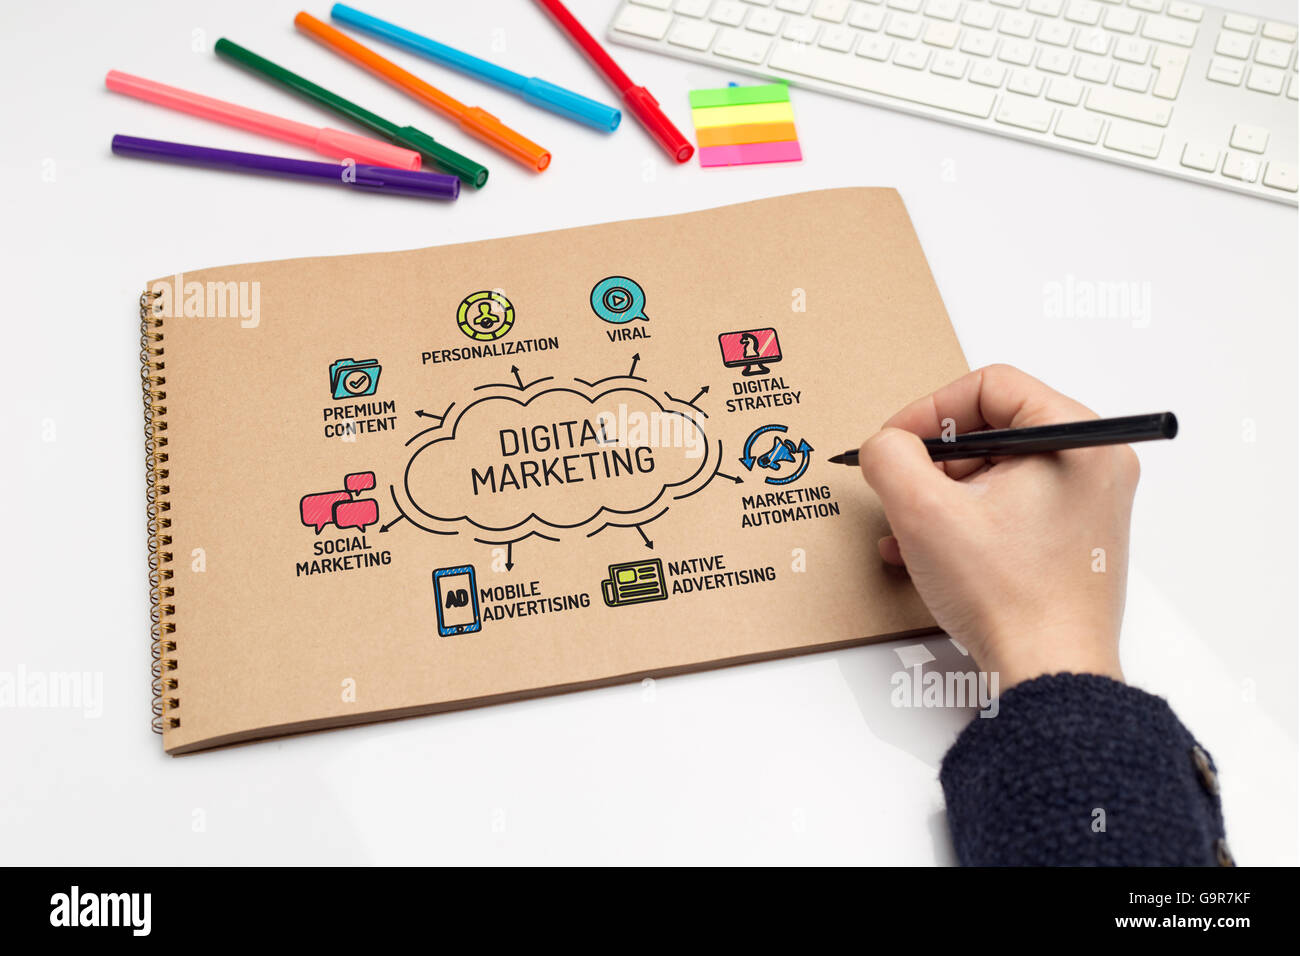 Digital Marketing chart with keywords and sketch icons Stock Photo